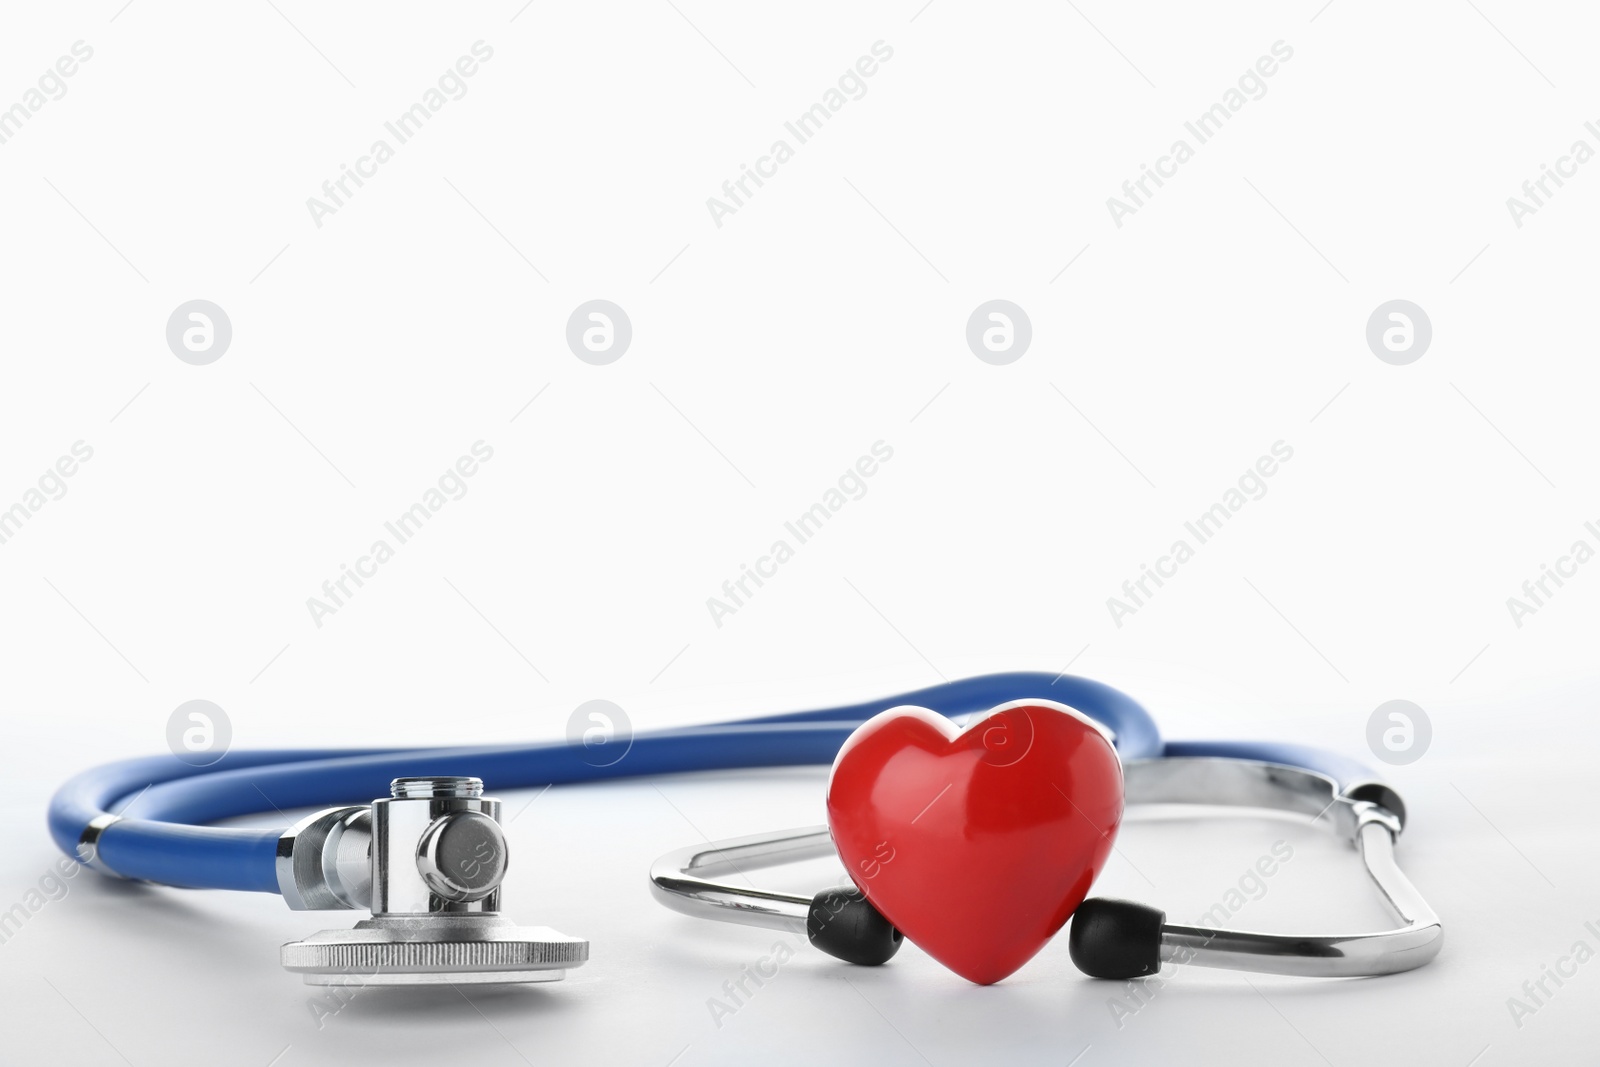 Photo of Stethoscope and red heart on white background